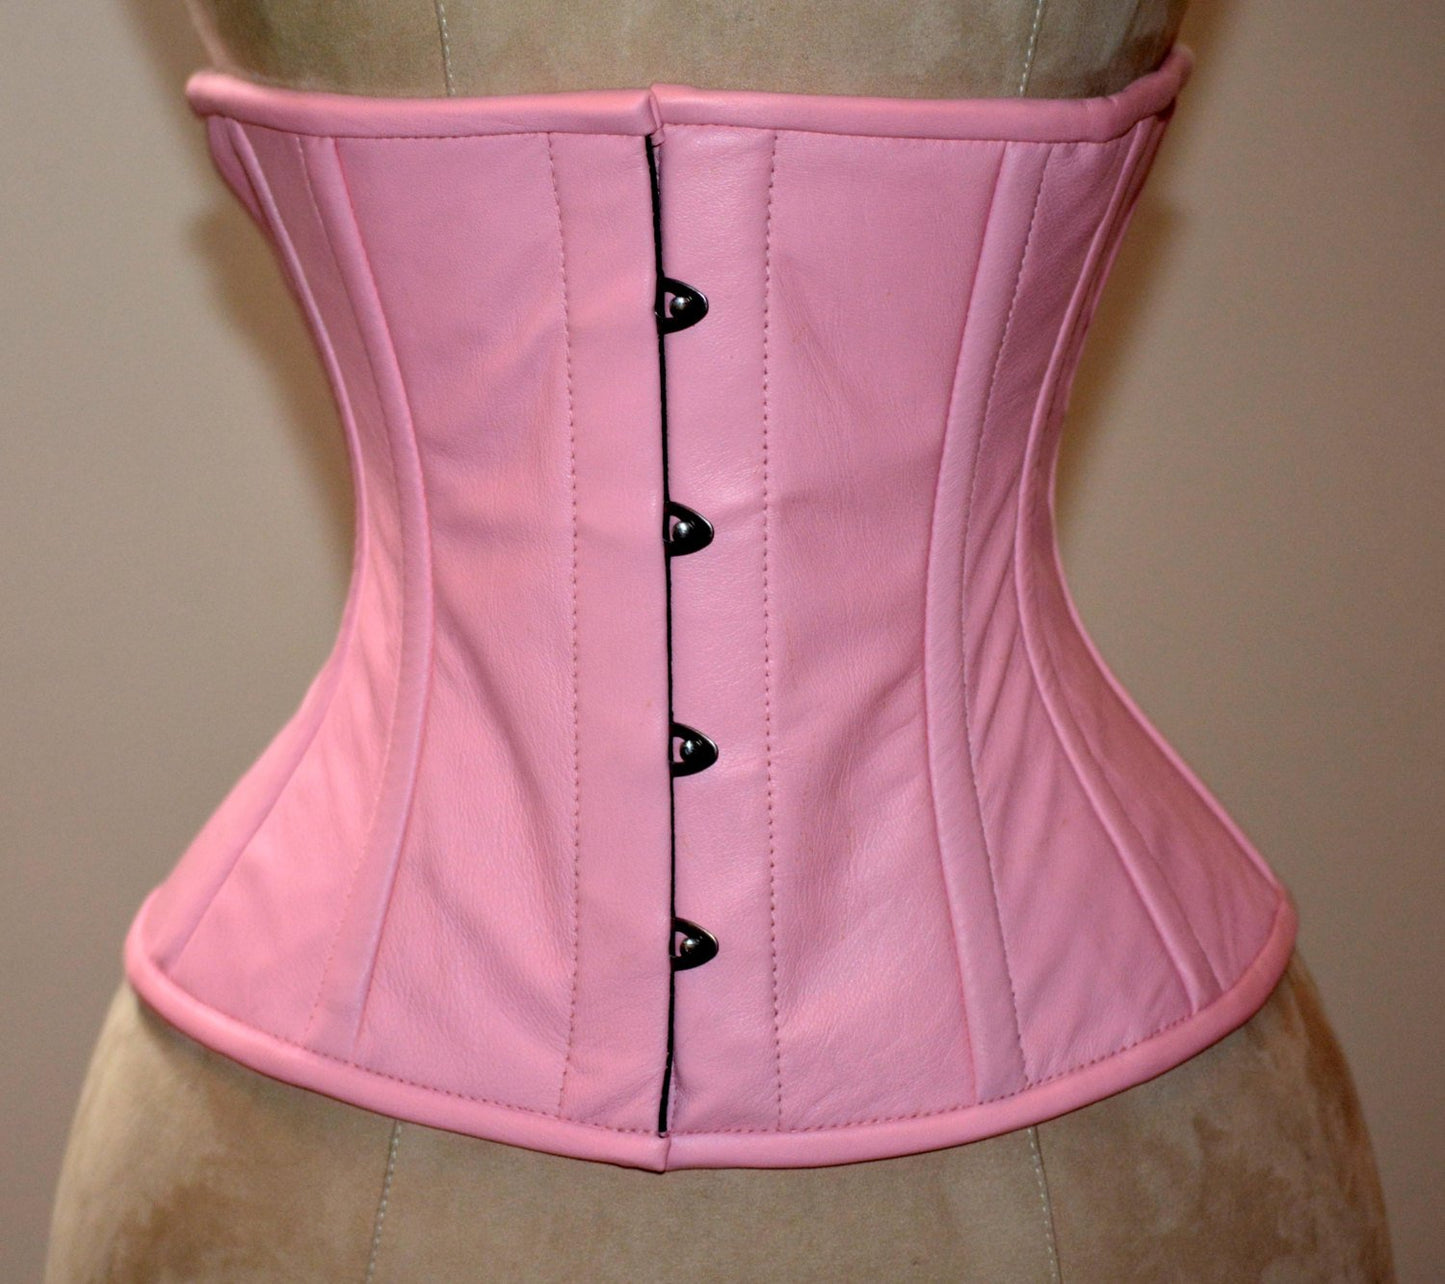 Authentic steel-boned corsets for tight lacing and waist training –  Corsettery Authentic Corsets USA